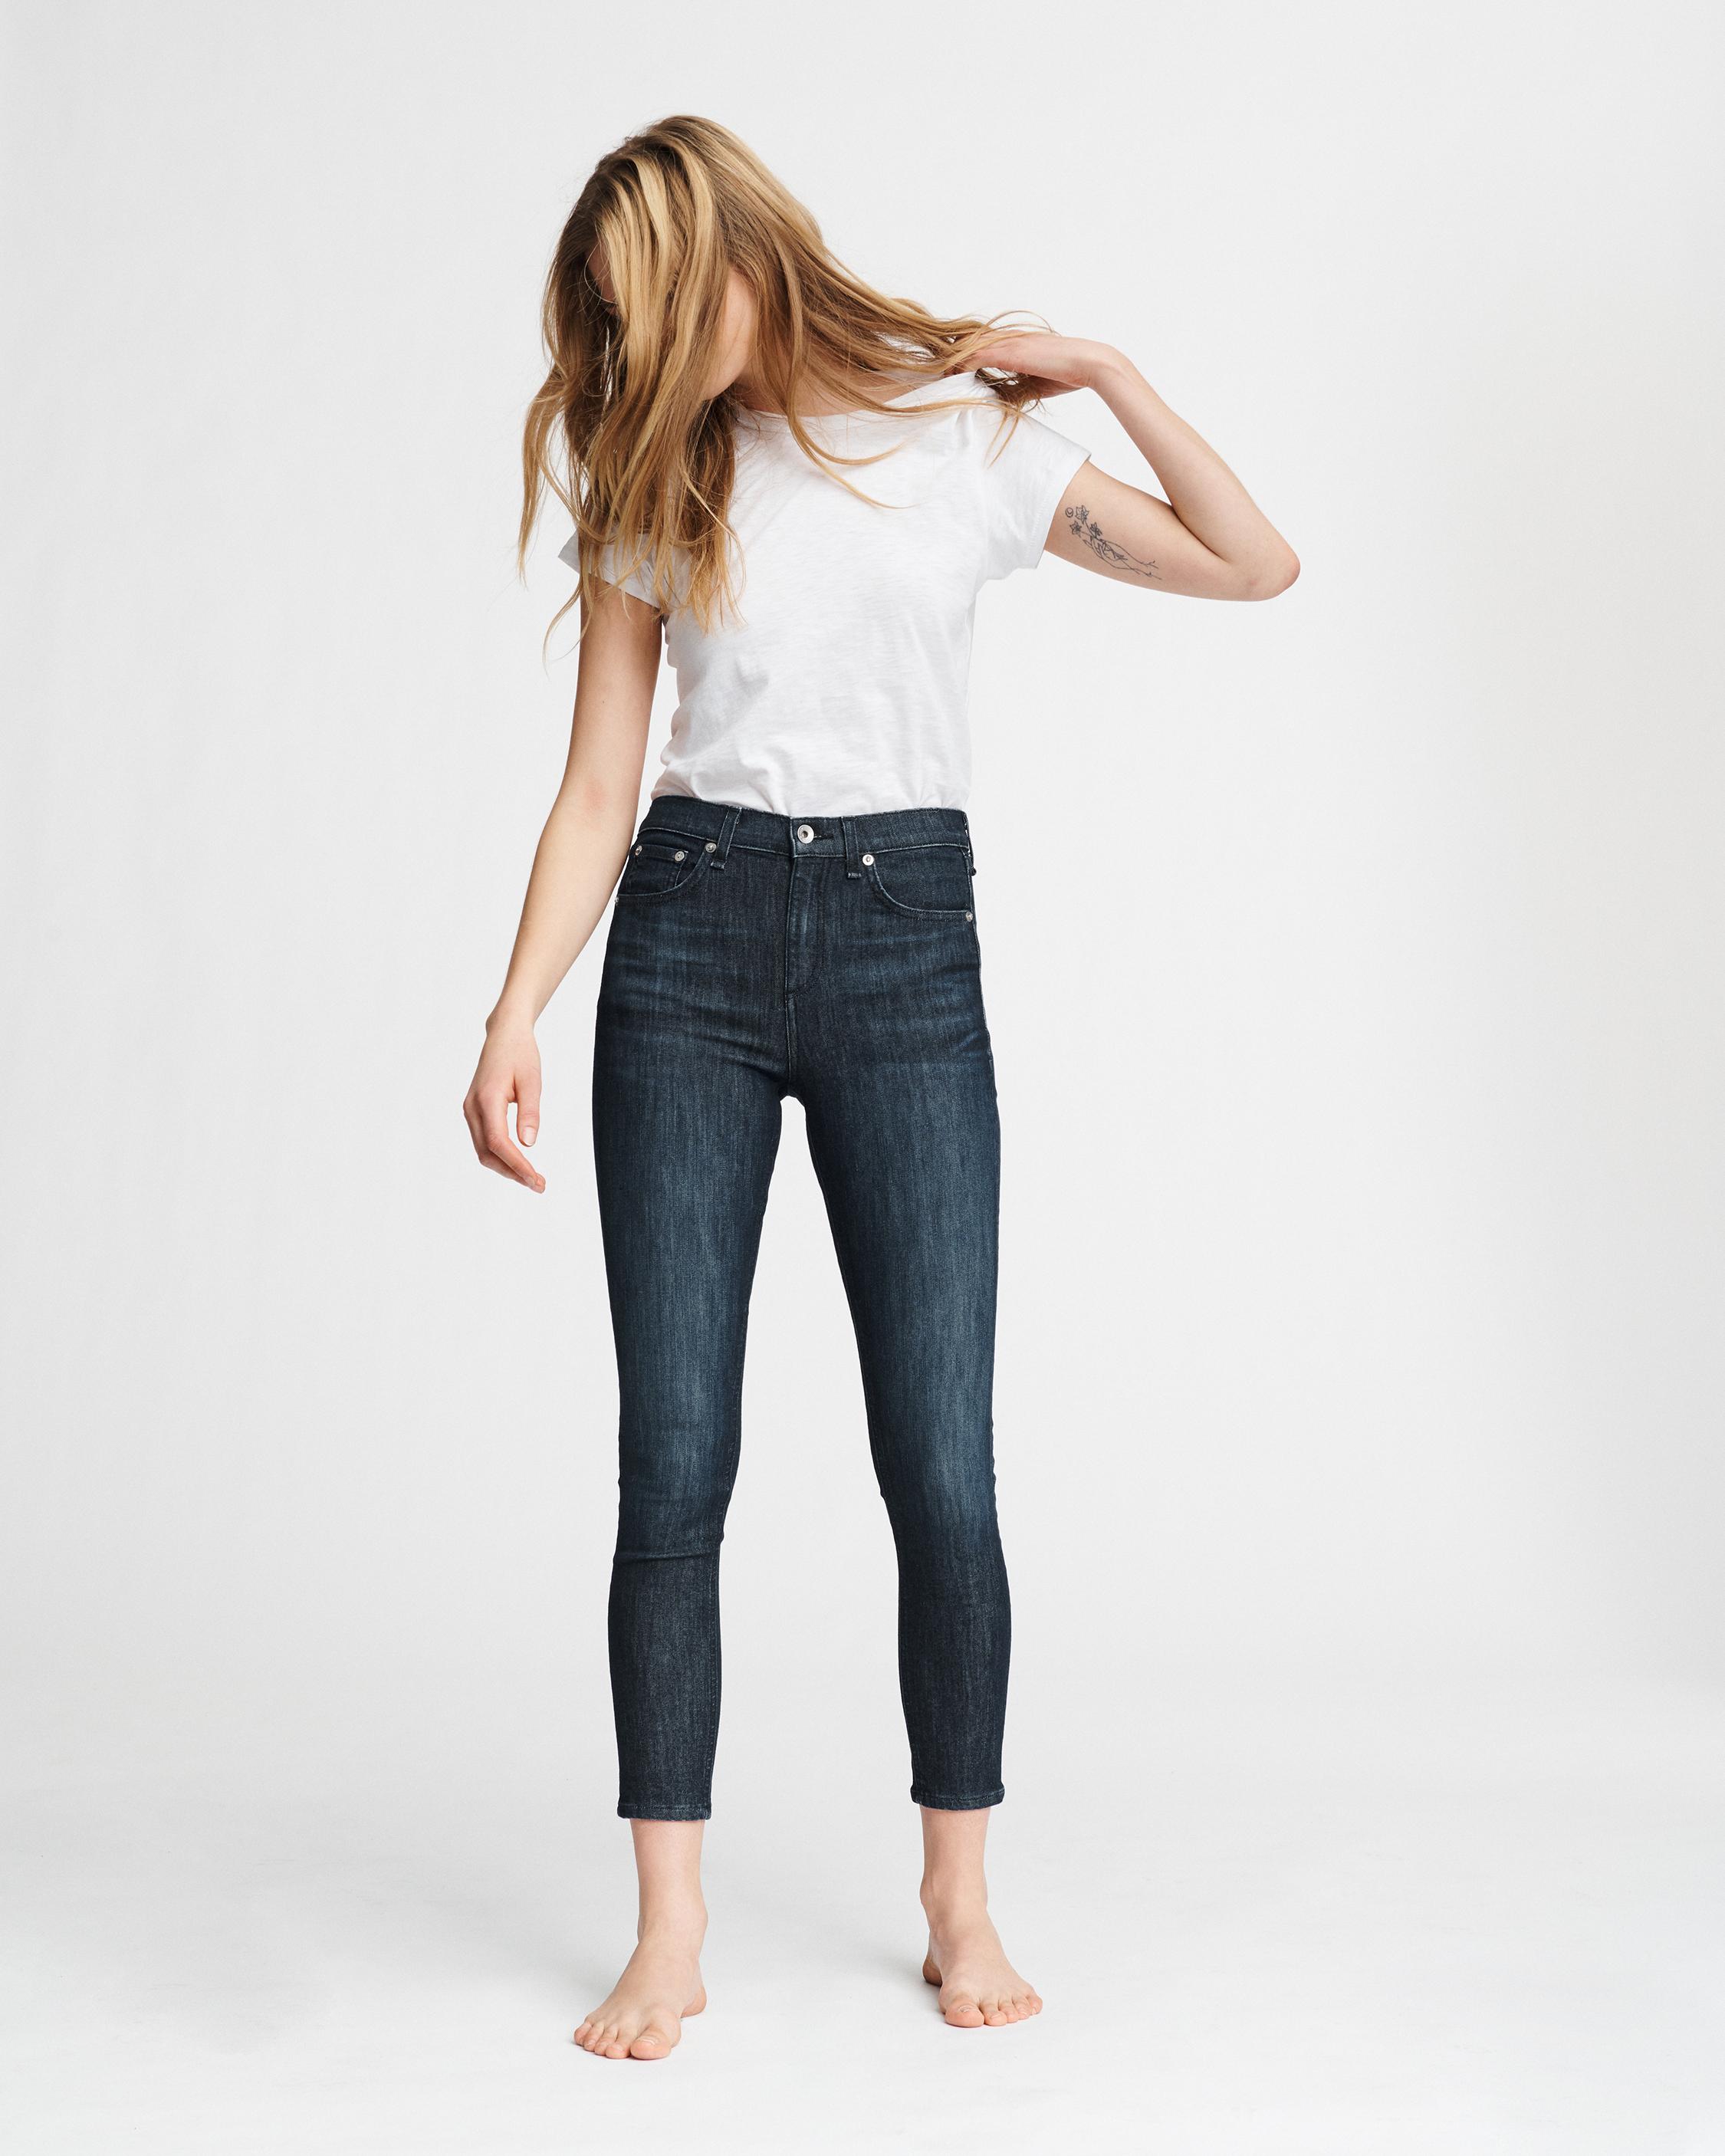 m and s high waisted skinny jeans